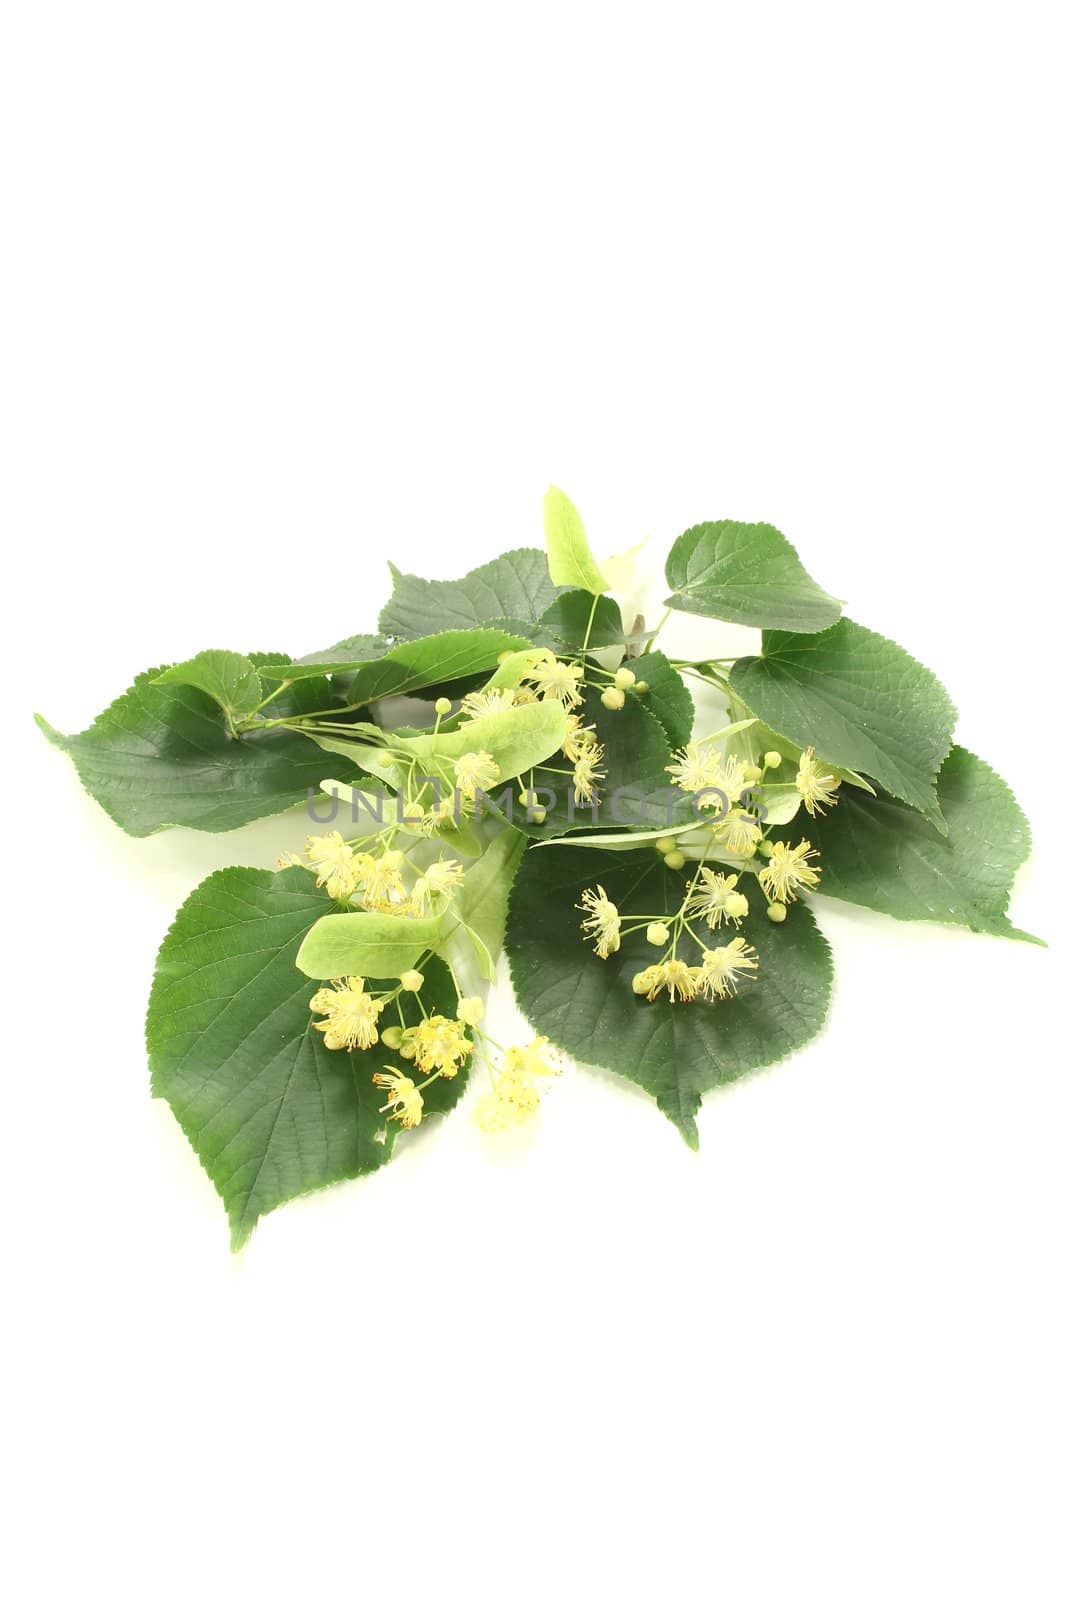 yellow linden blossoms with green leaves on a light background